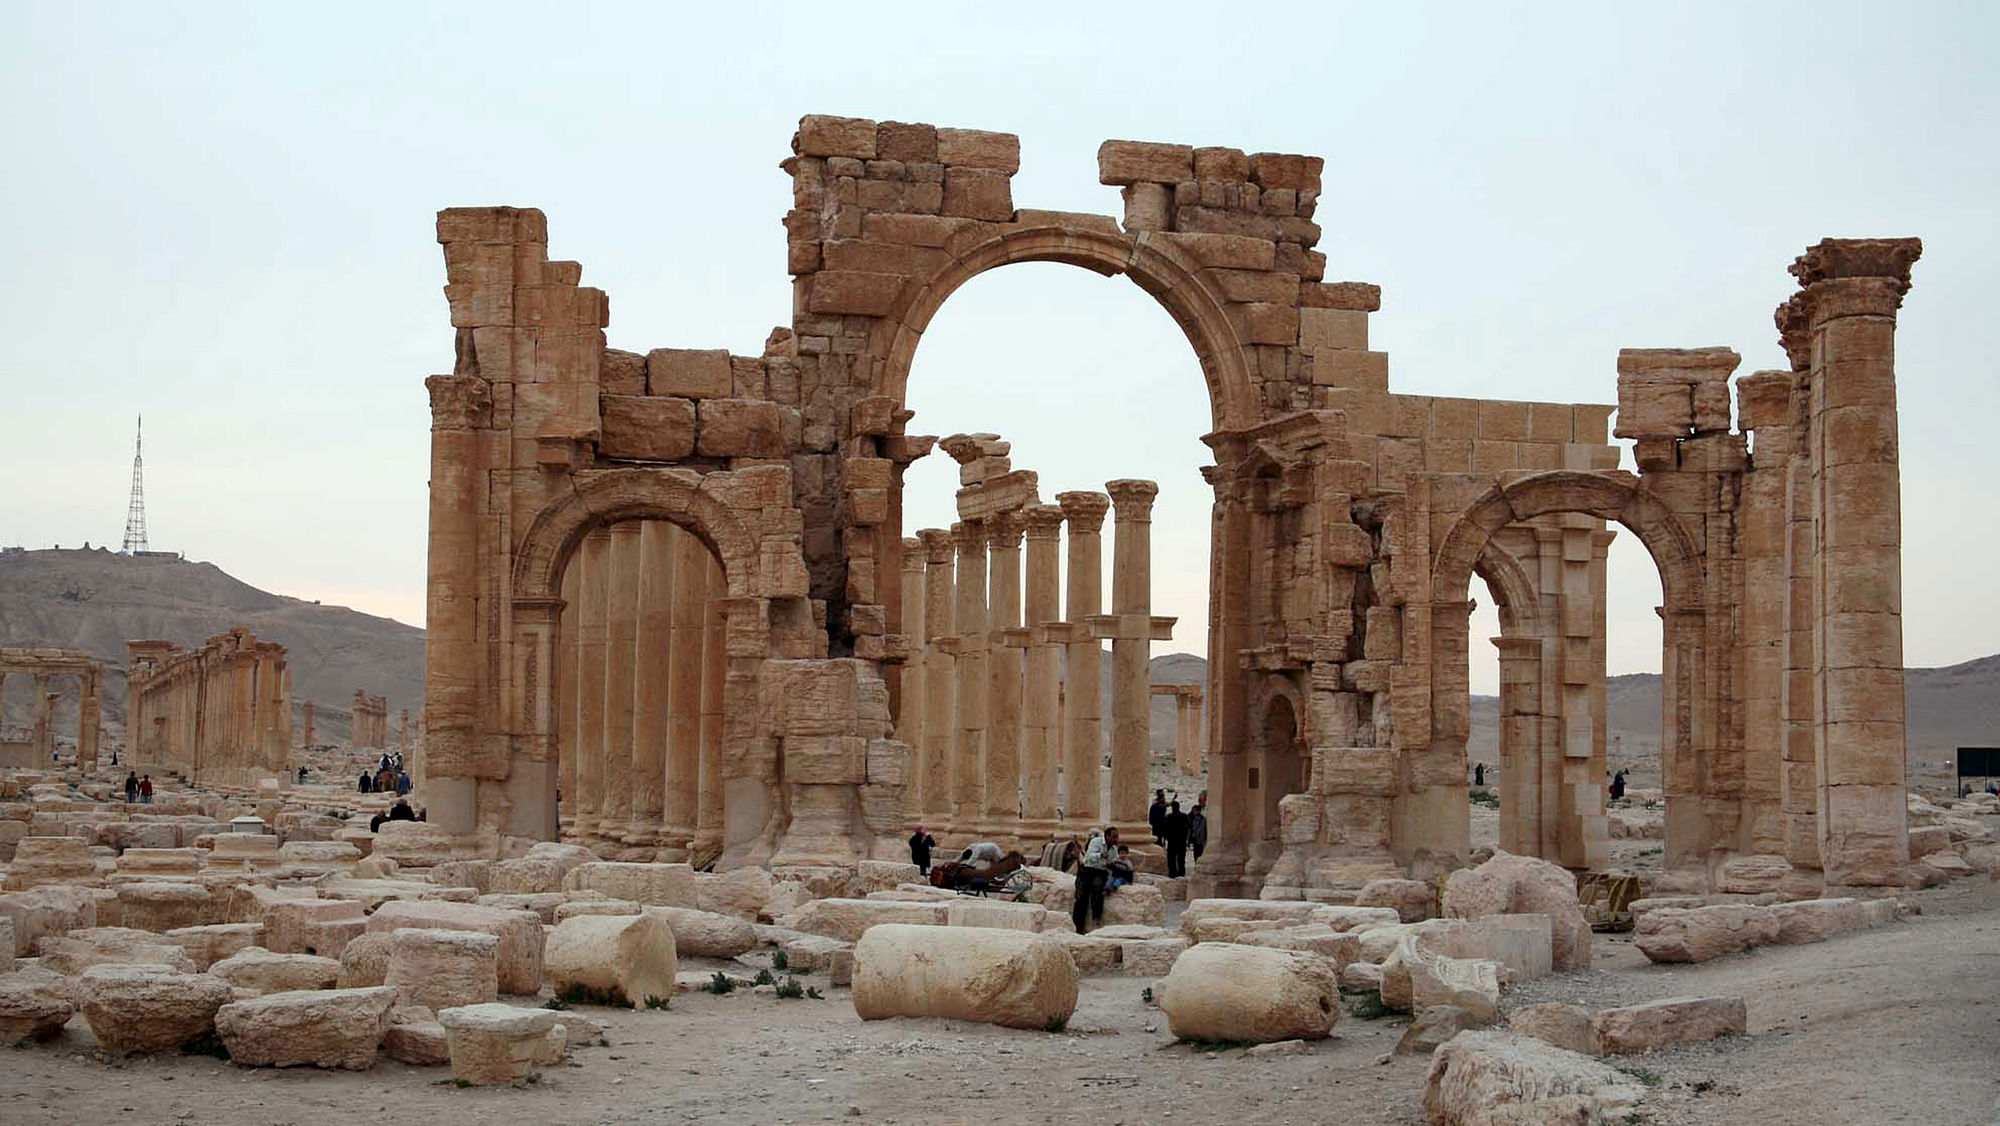 The ruin in city of Palmyra. (Photo: Reuters)